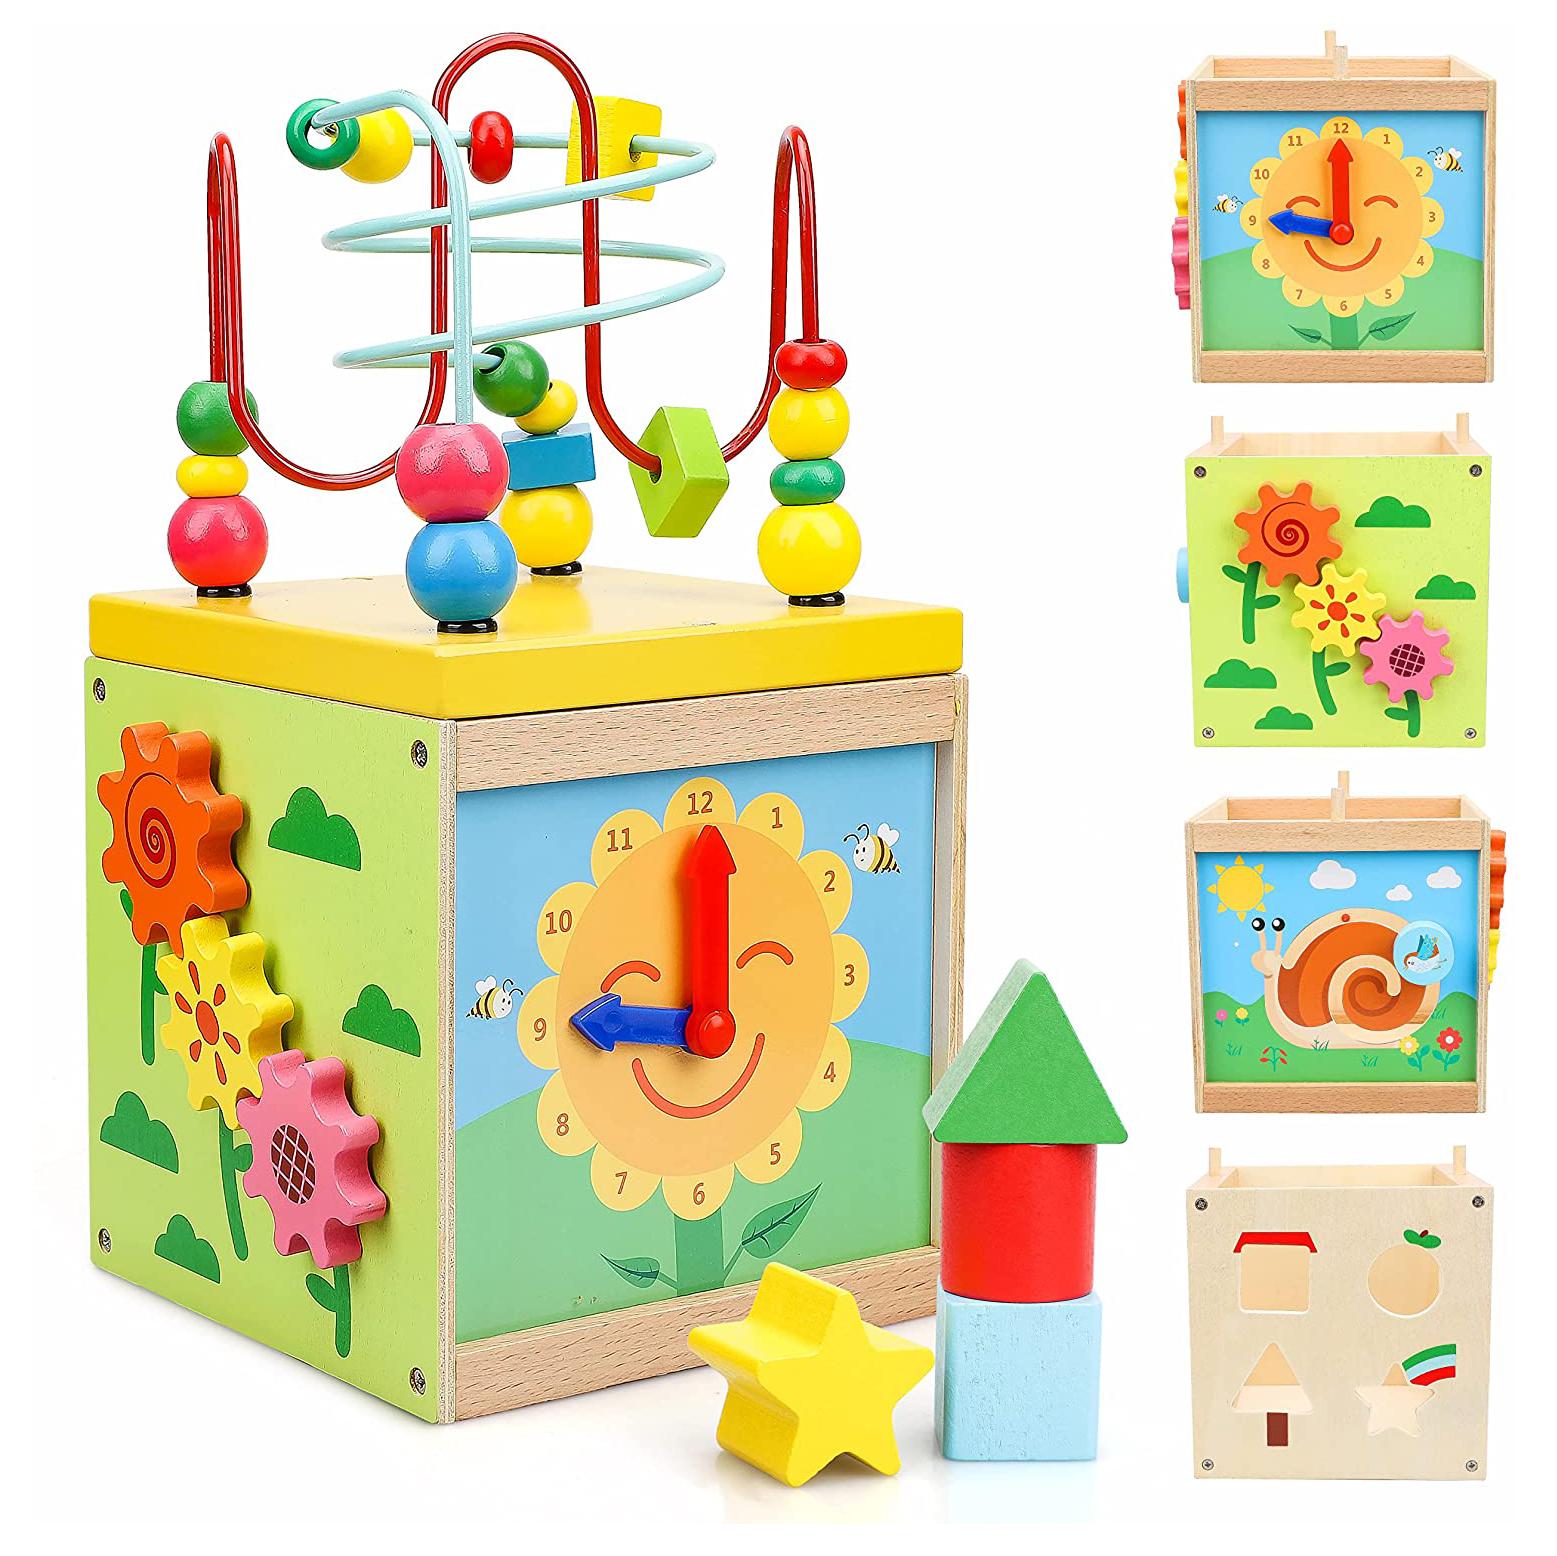 FourAll-Toys, Kids & Baby Wooden Baby Activity Cube for Toddlers Activity Cube Learning Toys, With Busy Cube Bead Maze Educational Toys for 1+ Year old 9 10 Month Old Baby